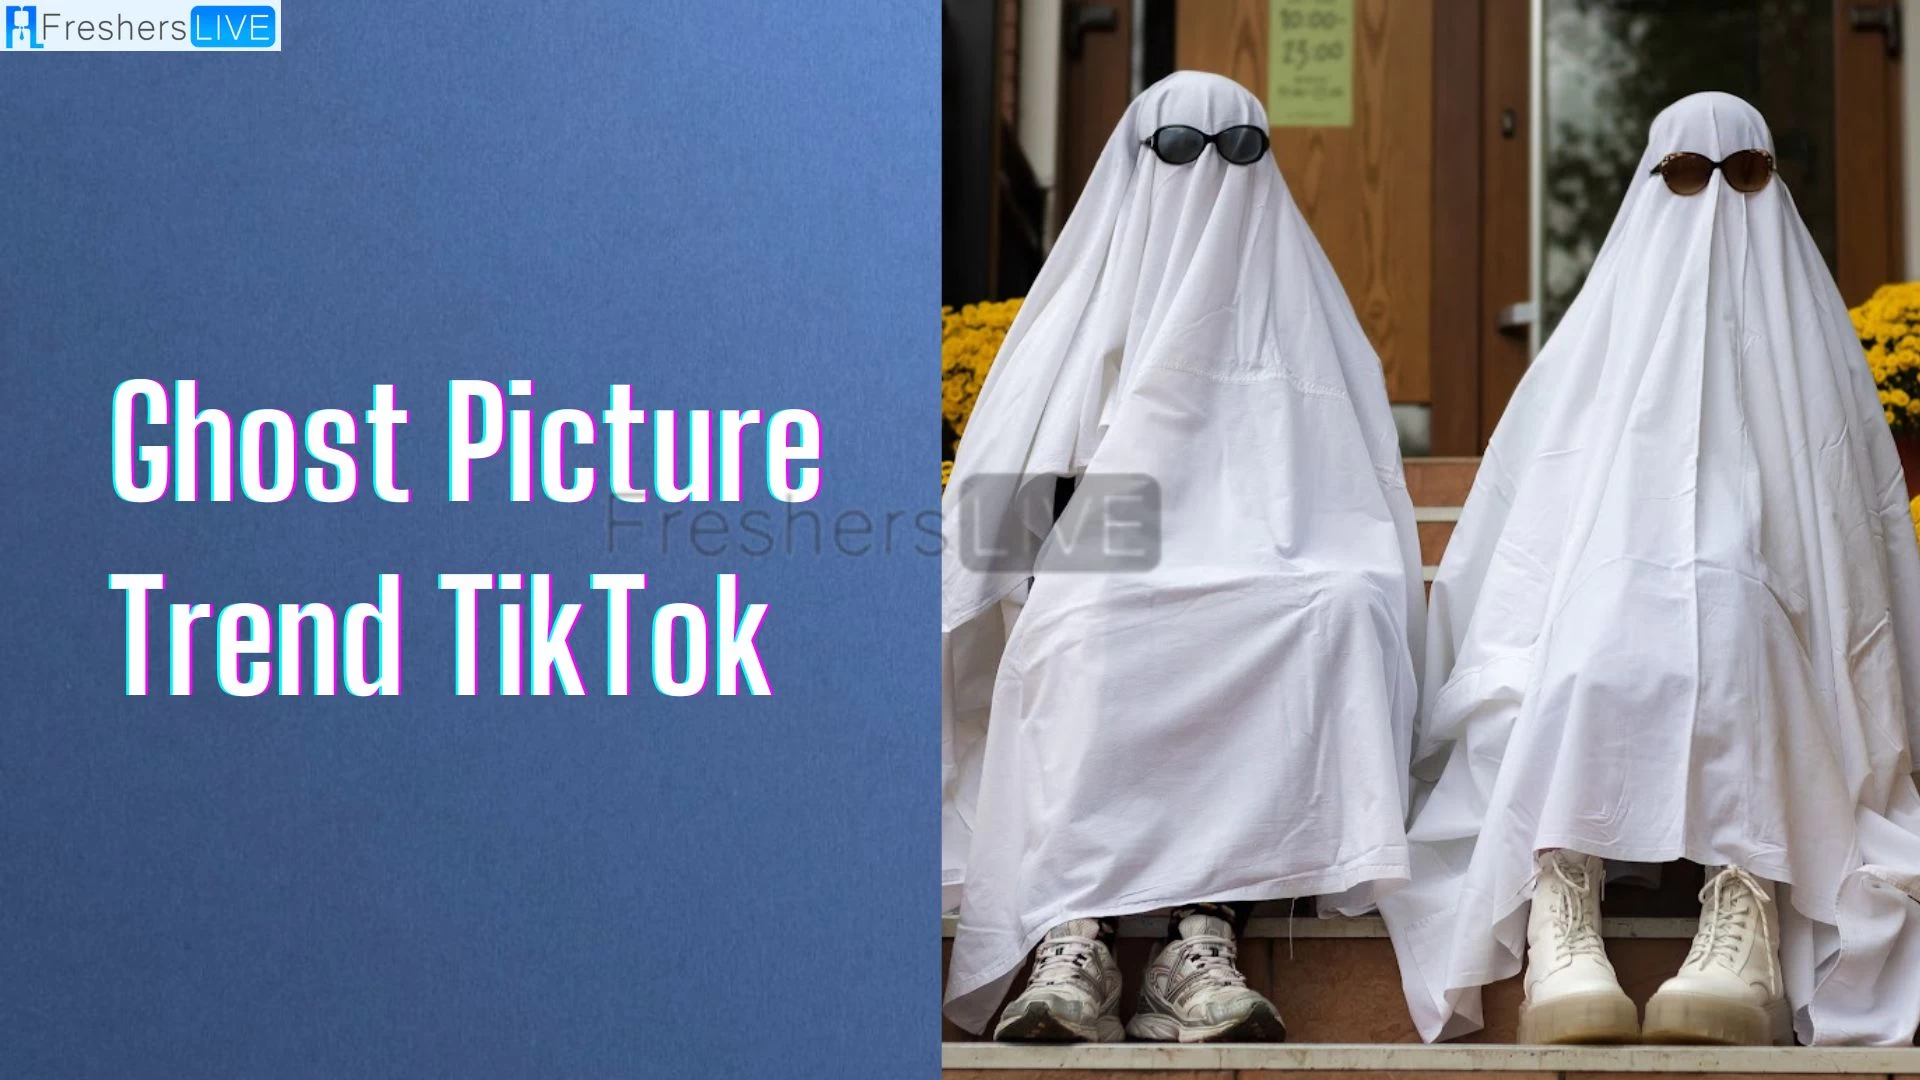 Ghost Picture Trend Tiktok, What is the Ghost Picture Trend on Tiktok? How to Do Ghost Picture Trend on Tiktok?